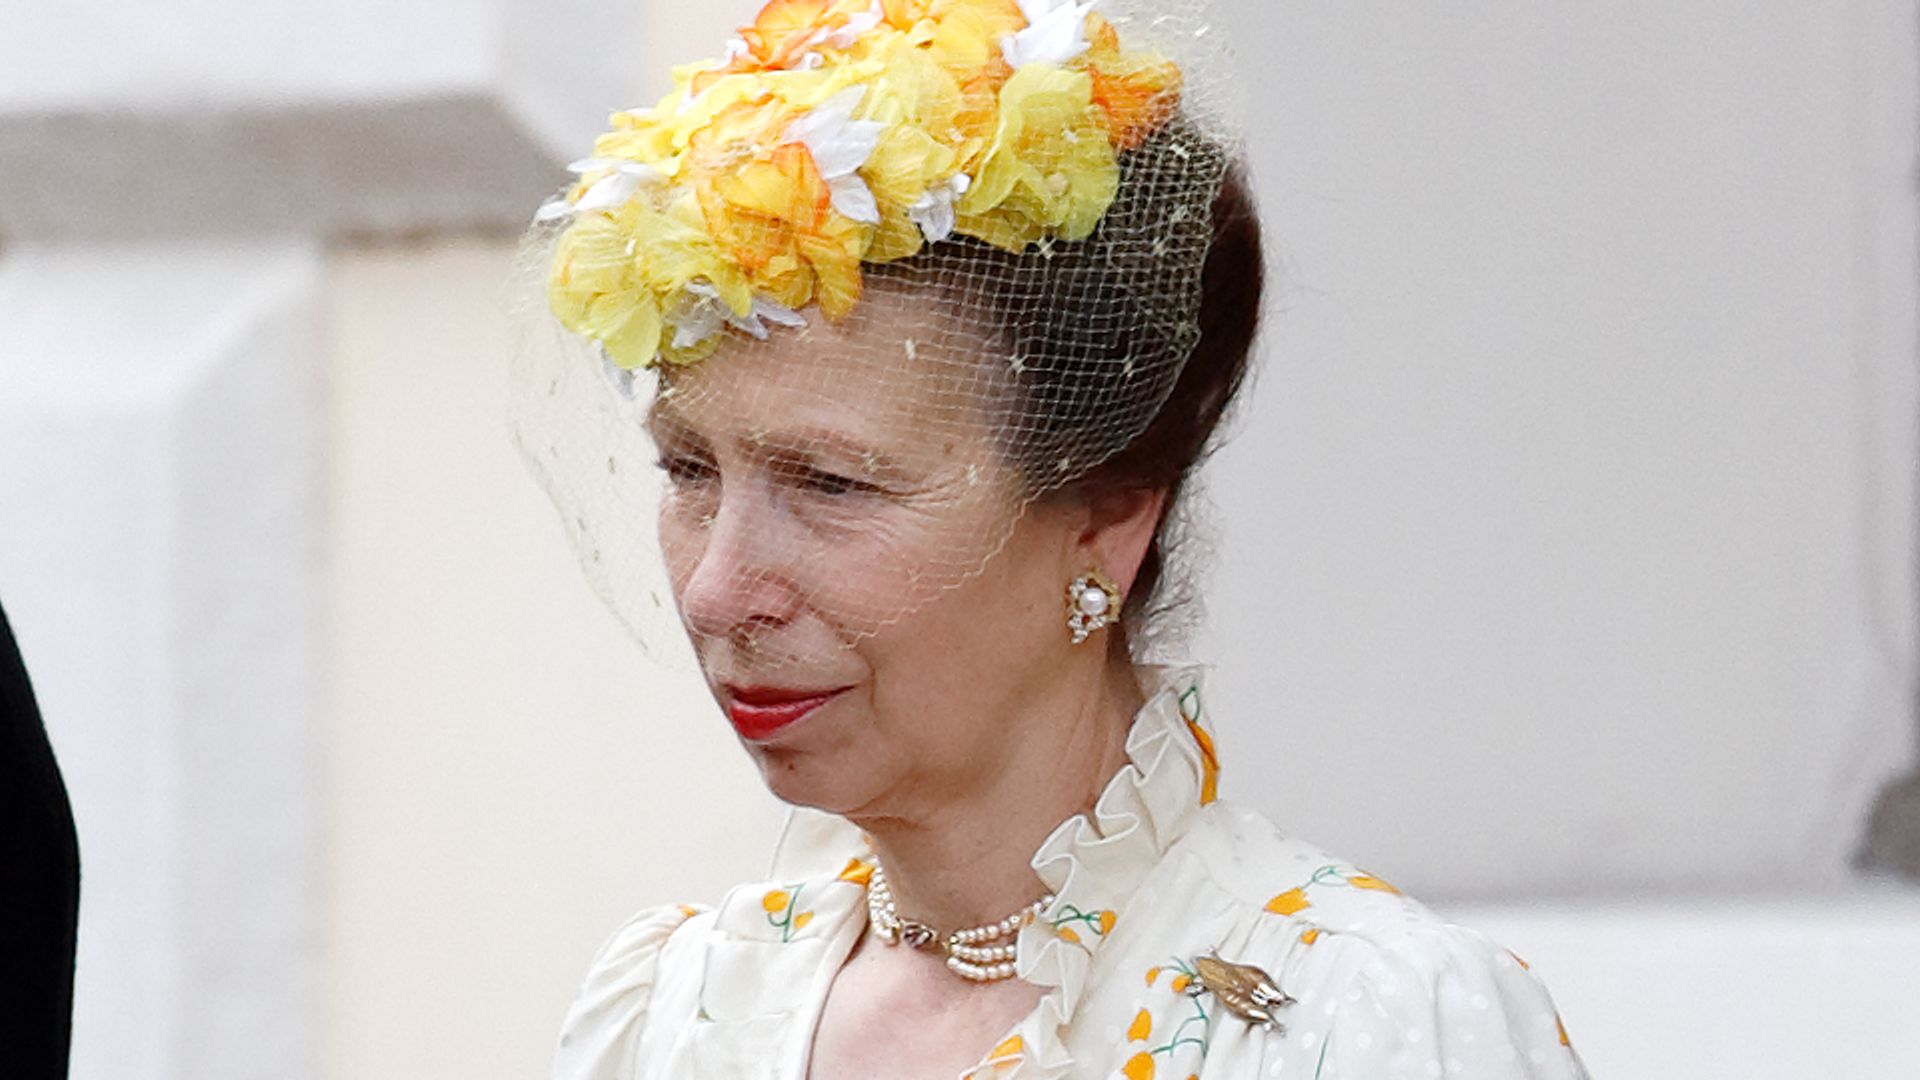 Princess Anne in a white ruffled dress and yellow headpiece